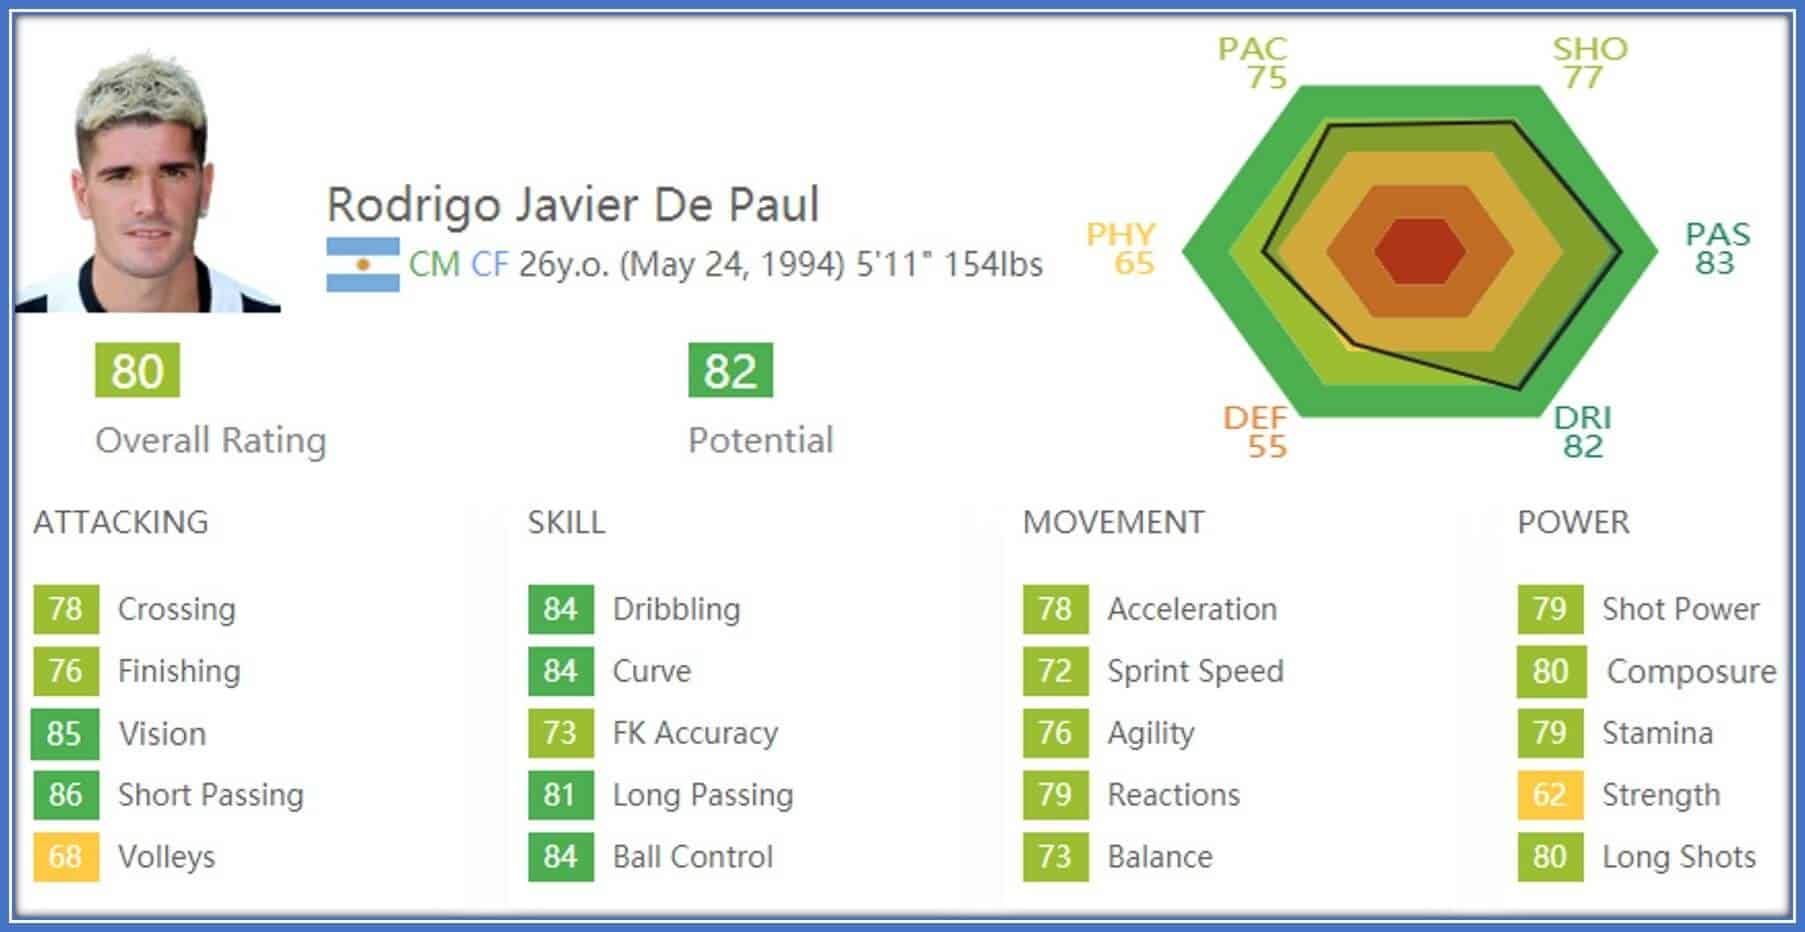 He's got an amazing stats, no doubt about that.